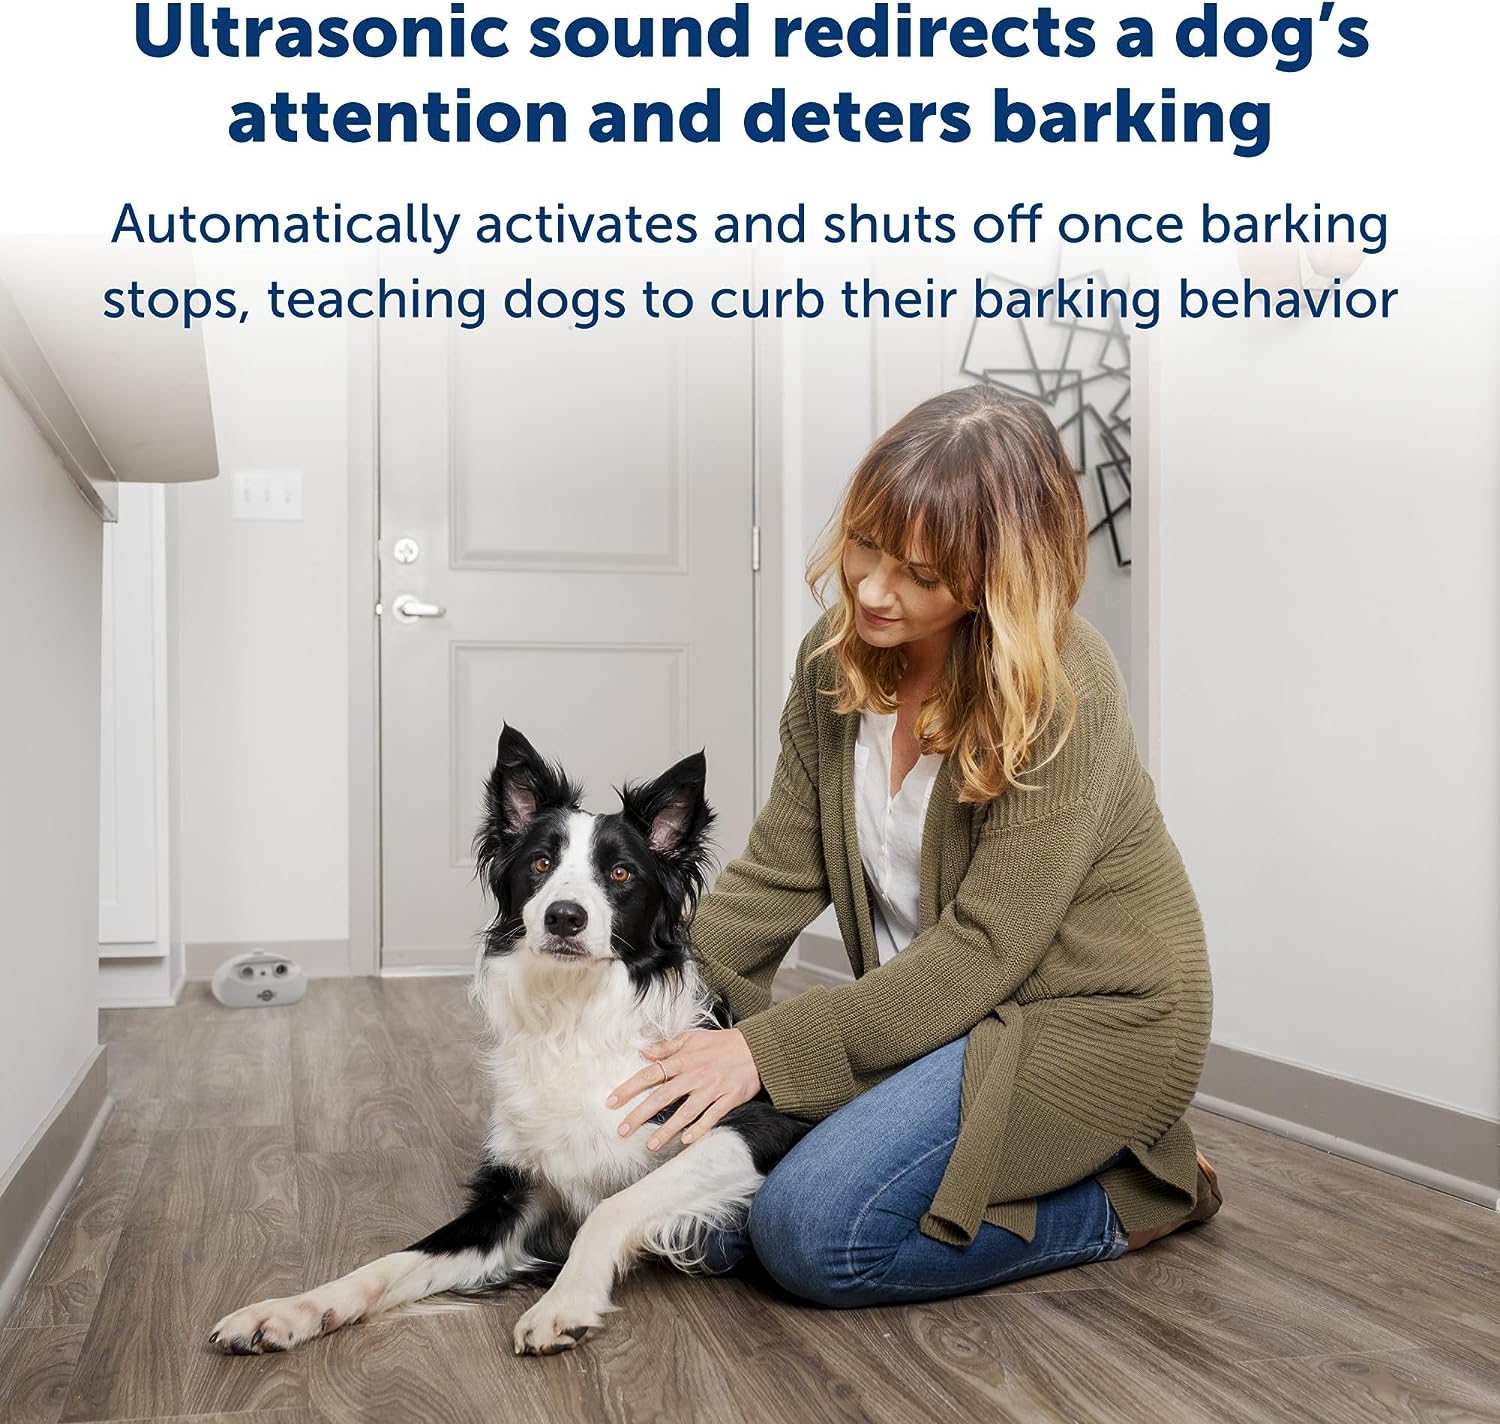 PetSafe Indoor Ultrasonic Dog Bark Control - No Collar Needed - Up to 25 ft Range - Anti-Bark Pet Training System - Automatic with Manual Trainer Button